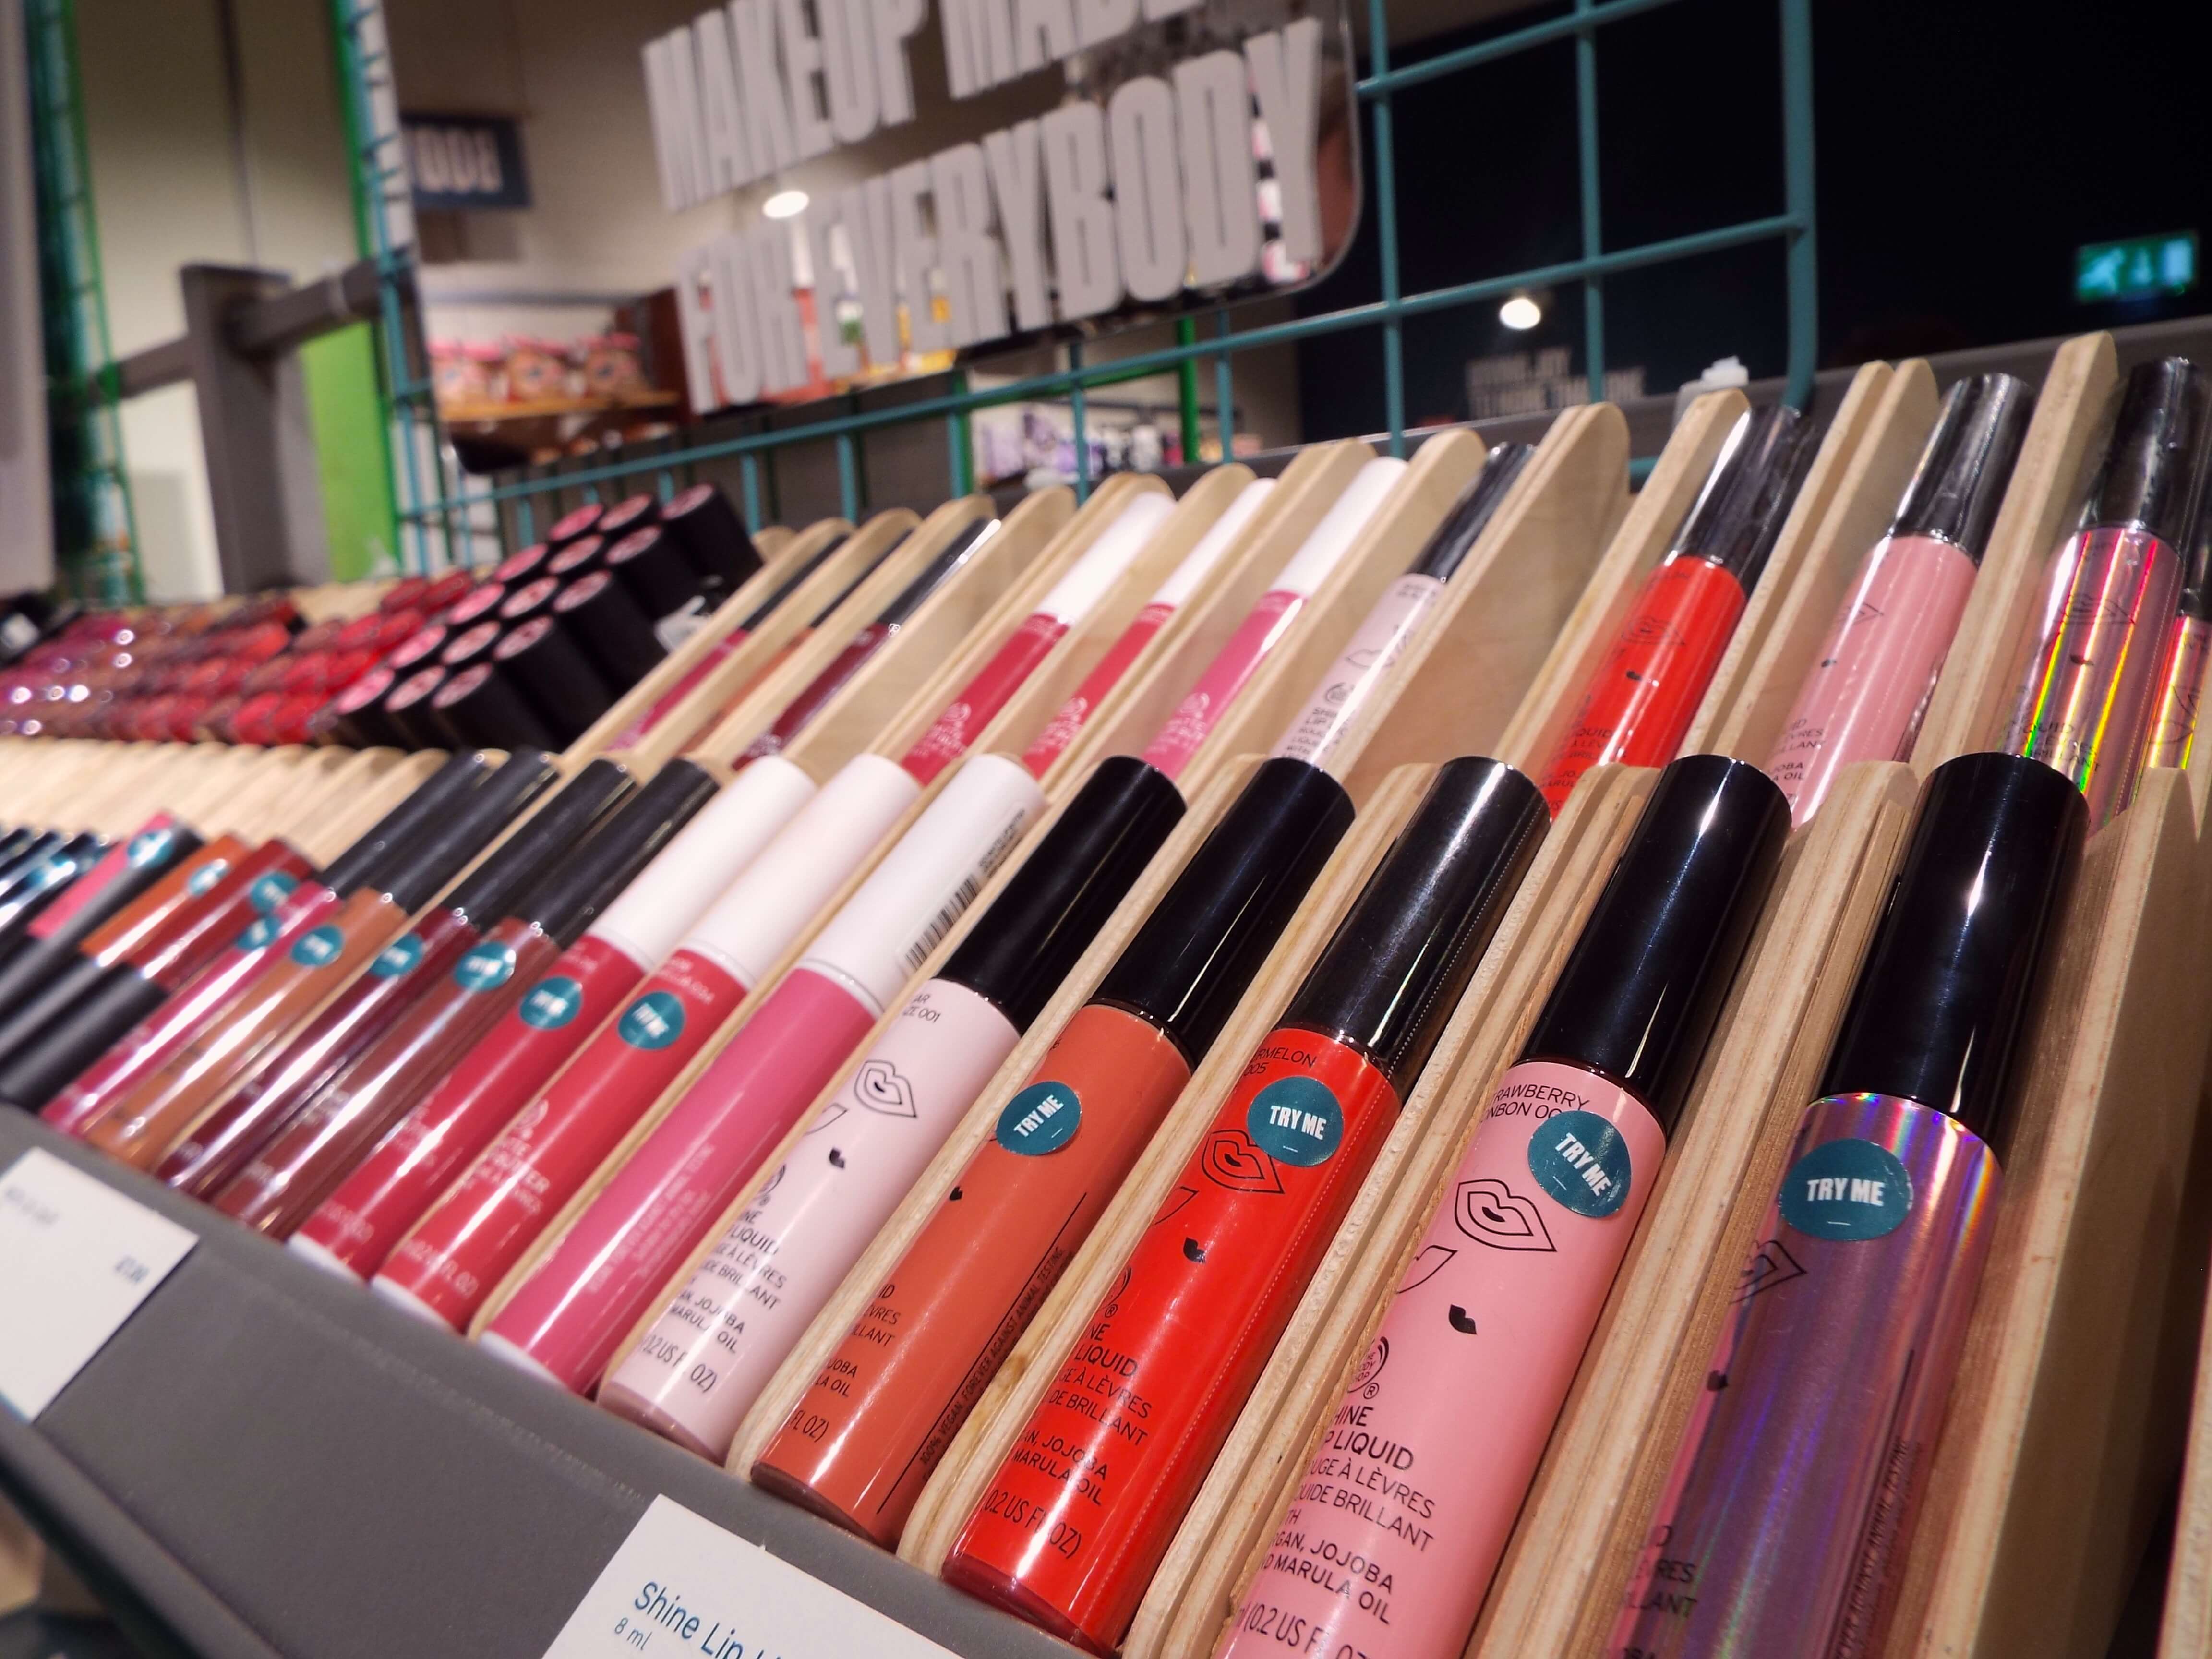 An array of The Body Shop liquid lipsticks and other lip products on display.